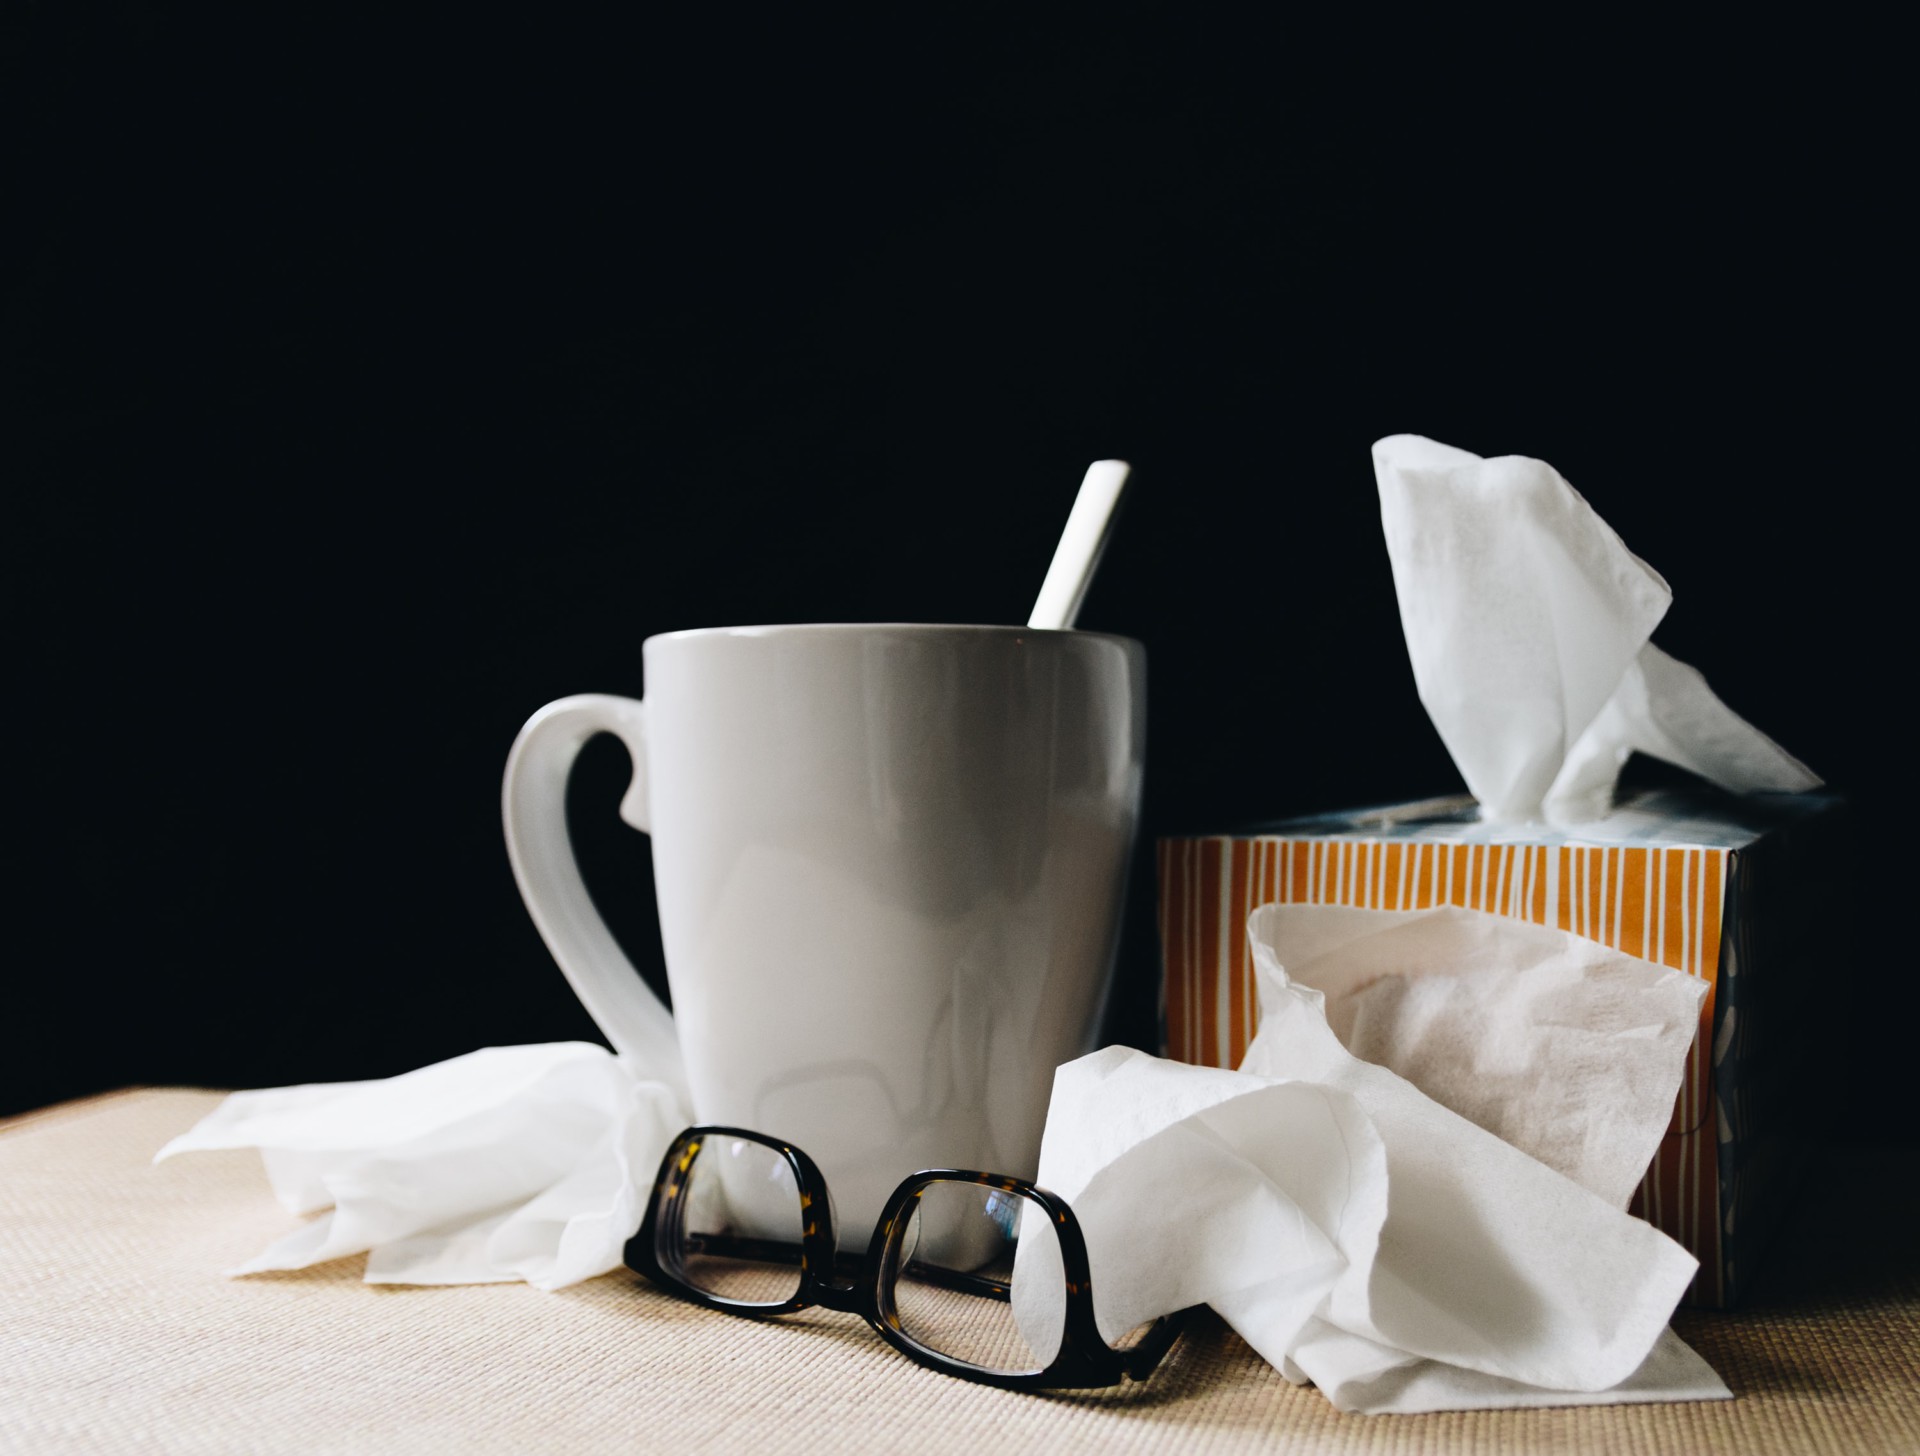 Boost your immune system this cold and flu season